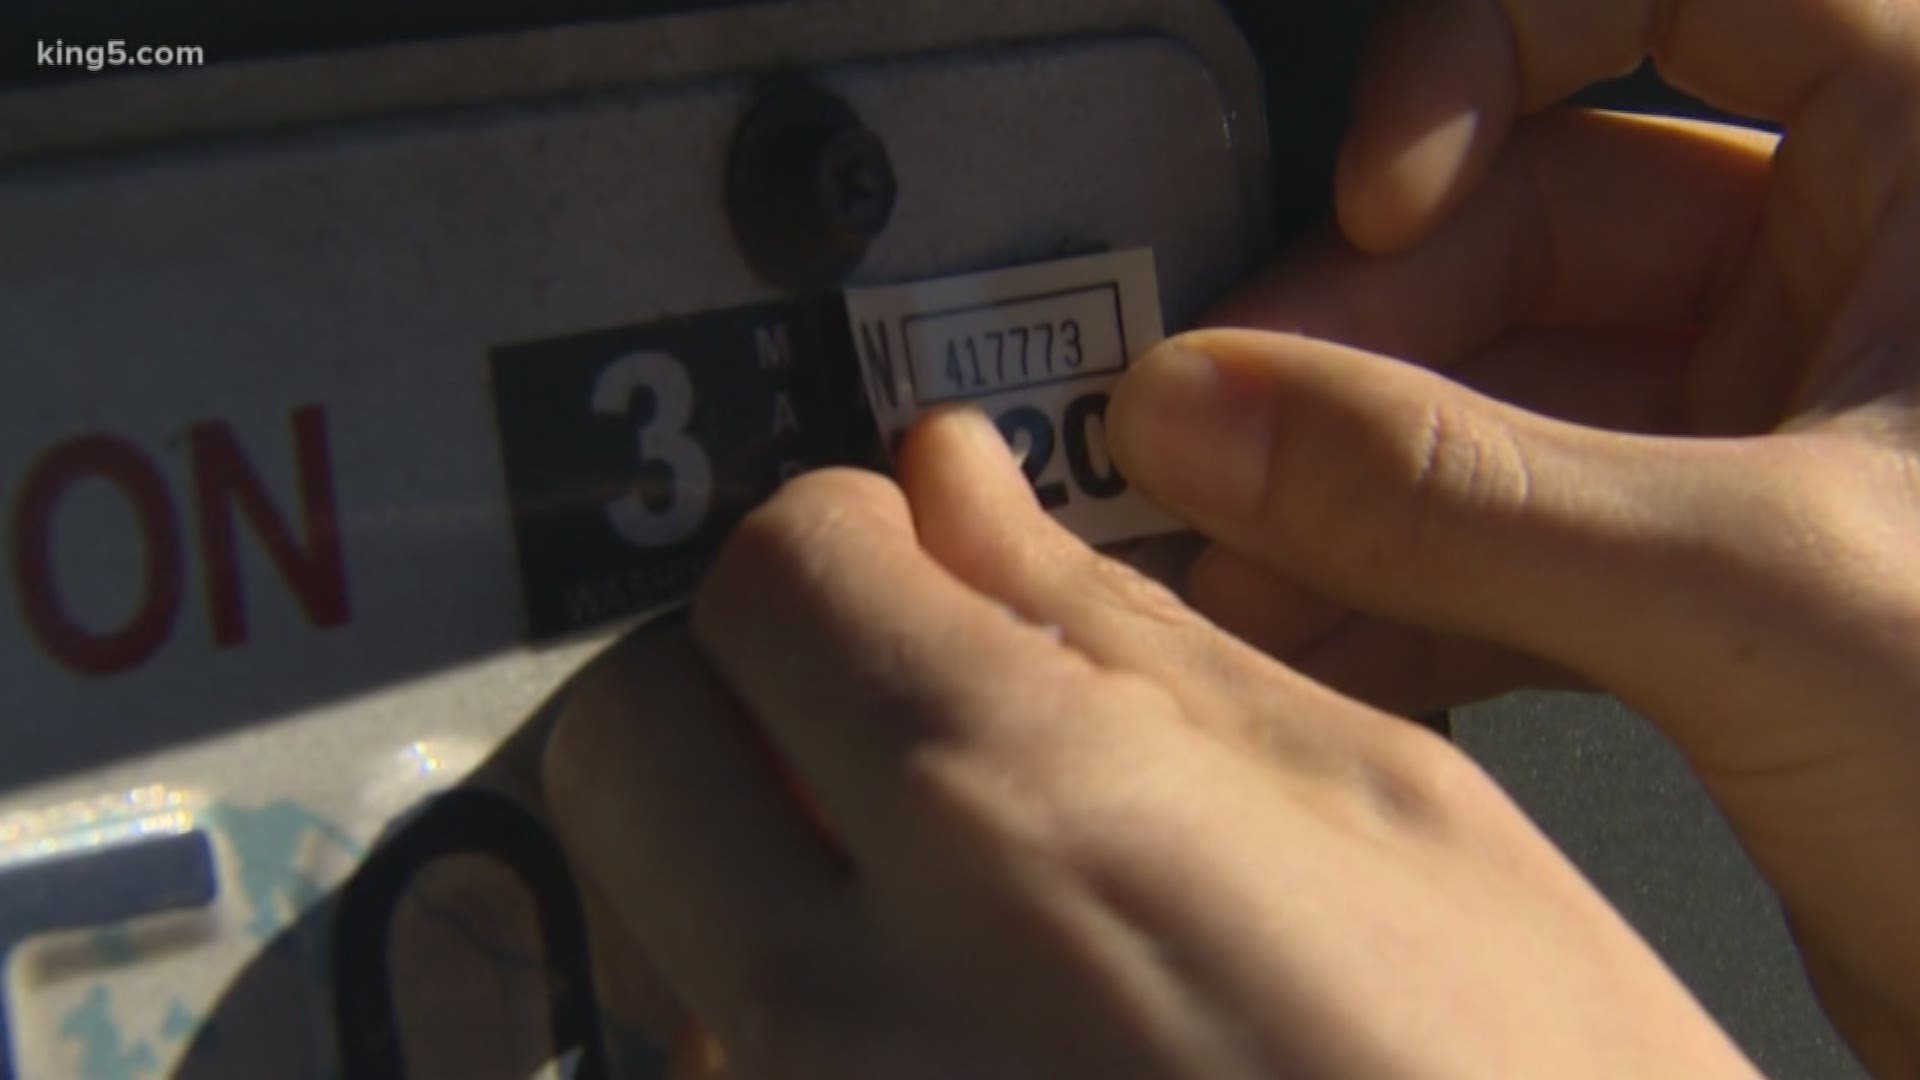 Could a series of state miscalculations give new life to Tim Eyman's car tab initiative? The anti-tax crusader says that the state's errors in calculating the annual fees give further credence to his push for $30 car tabs. KING 5's Chris Daniels reports.